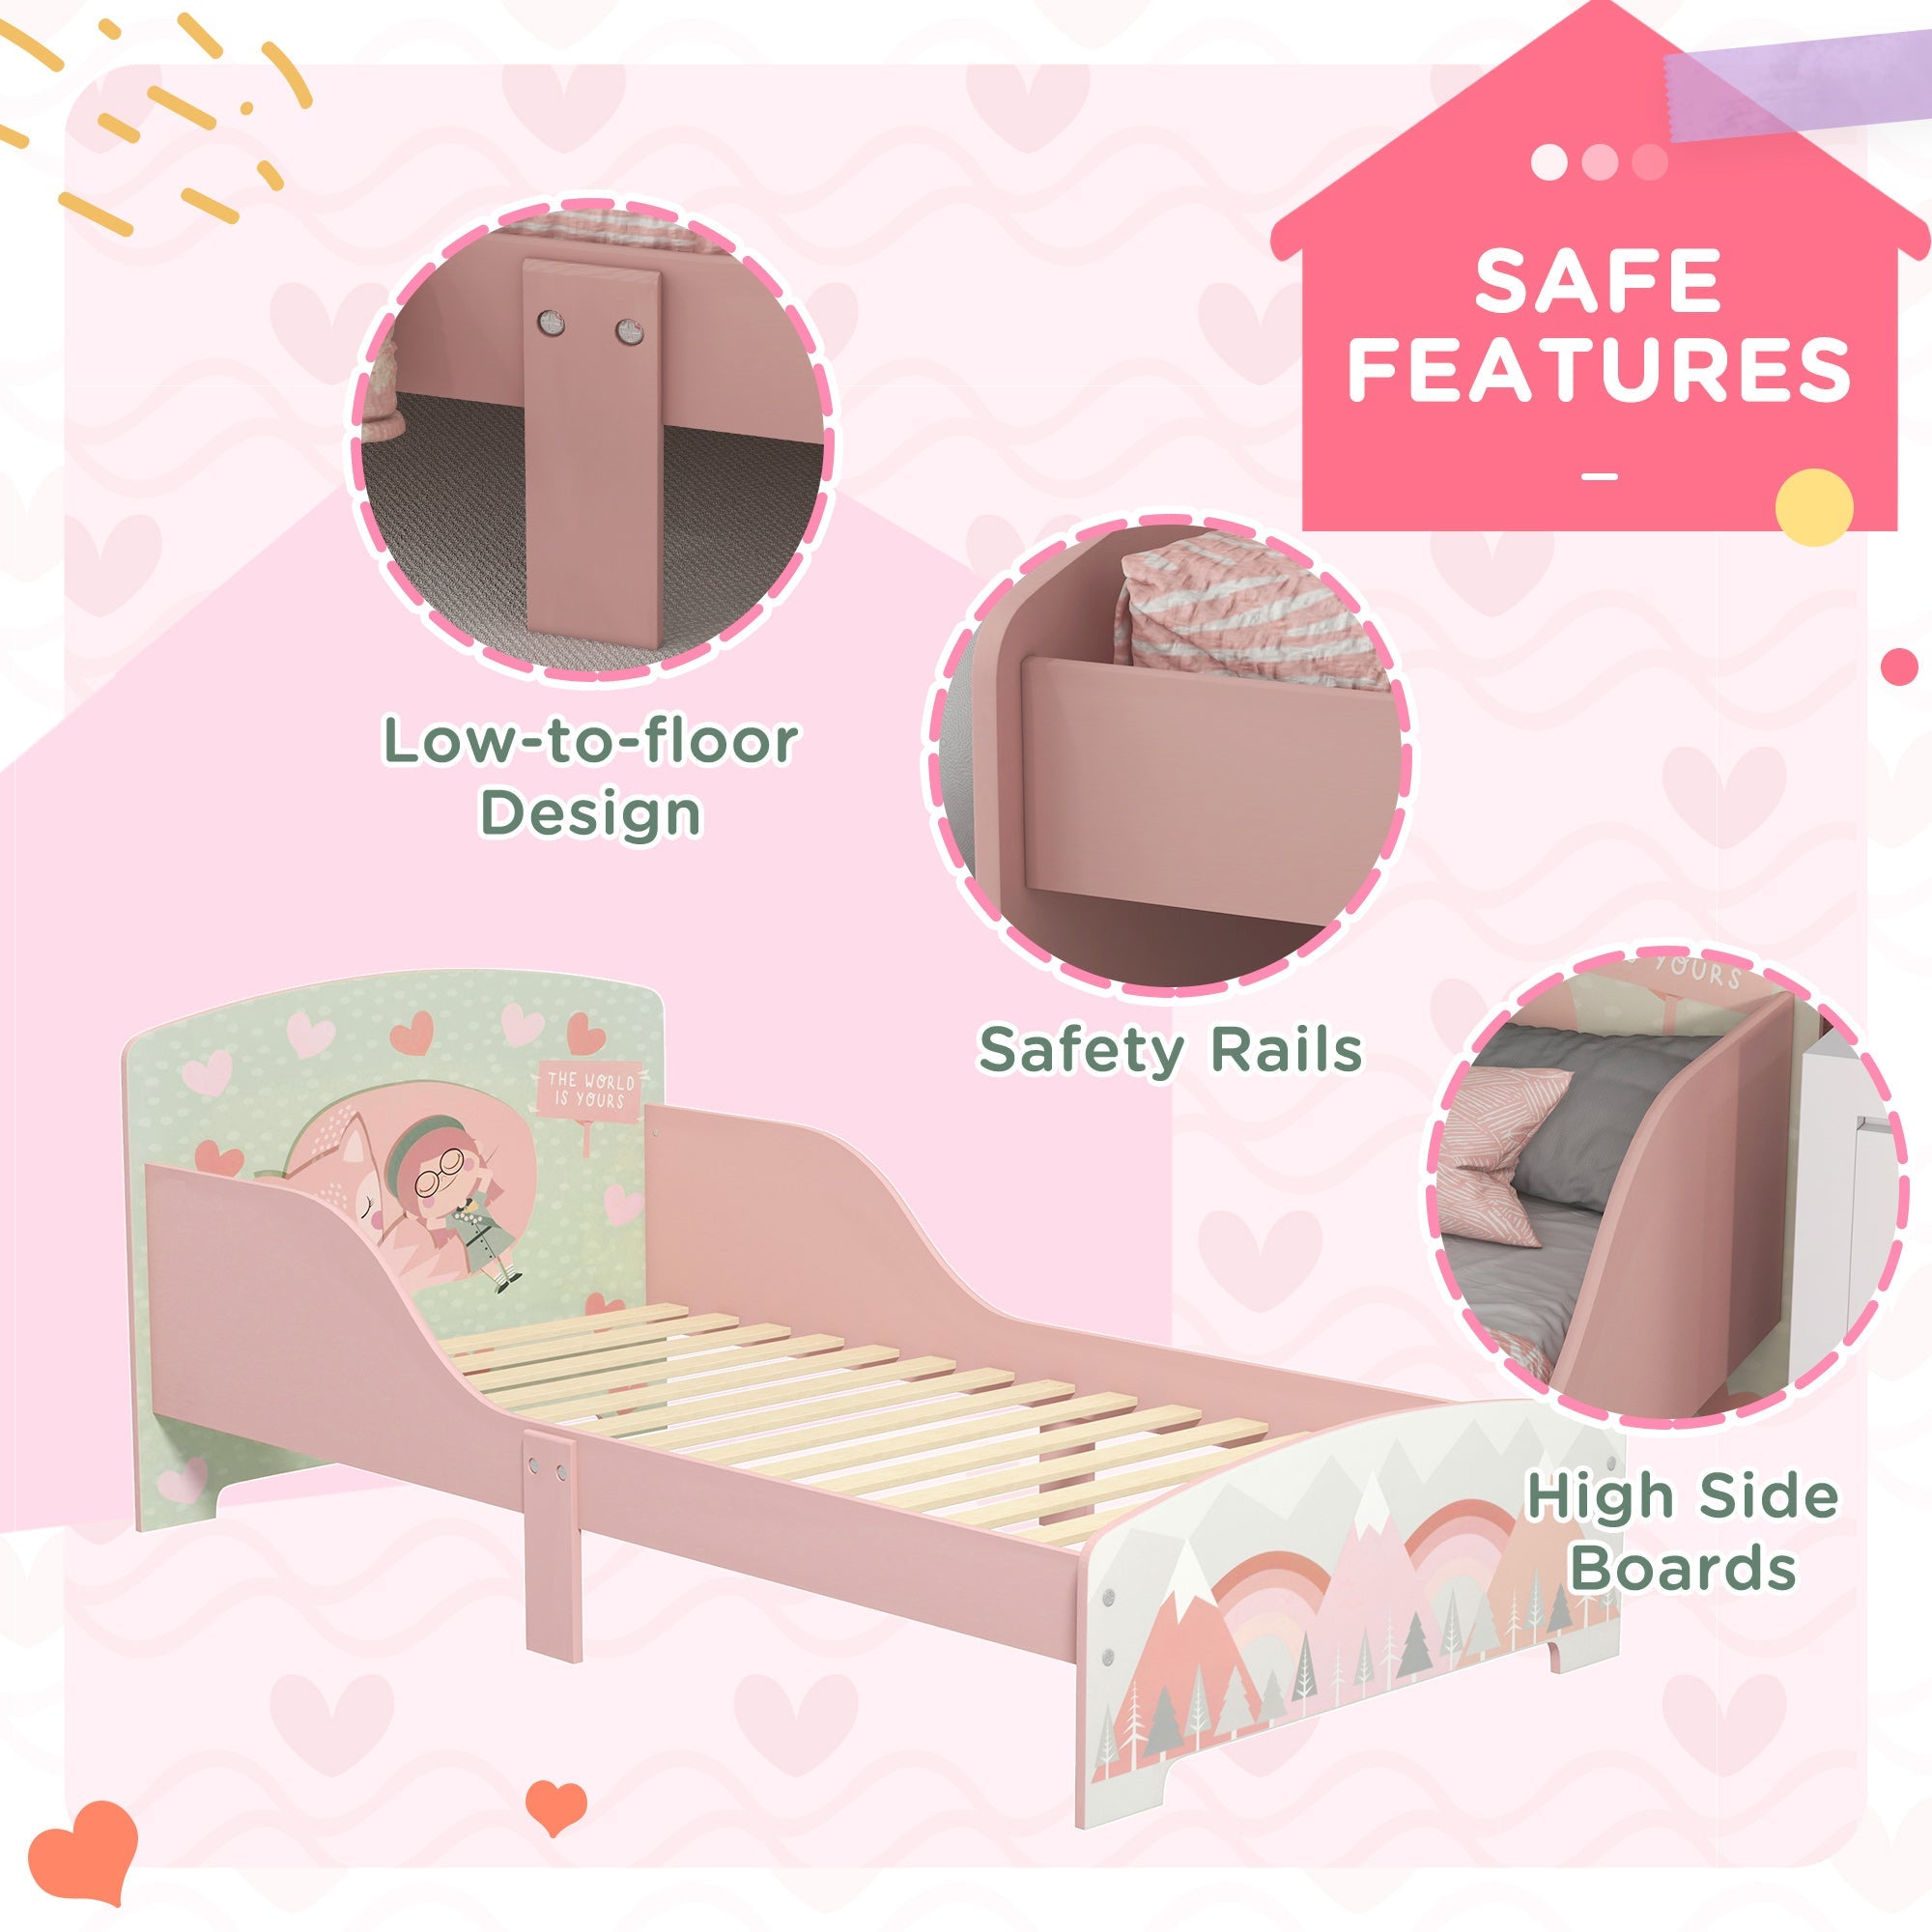 ZONEKIZ Toddler Bed Frame, Kids Bedroom Furniture for Ages 3-6 Years, Pink - TovaHaus